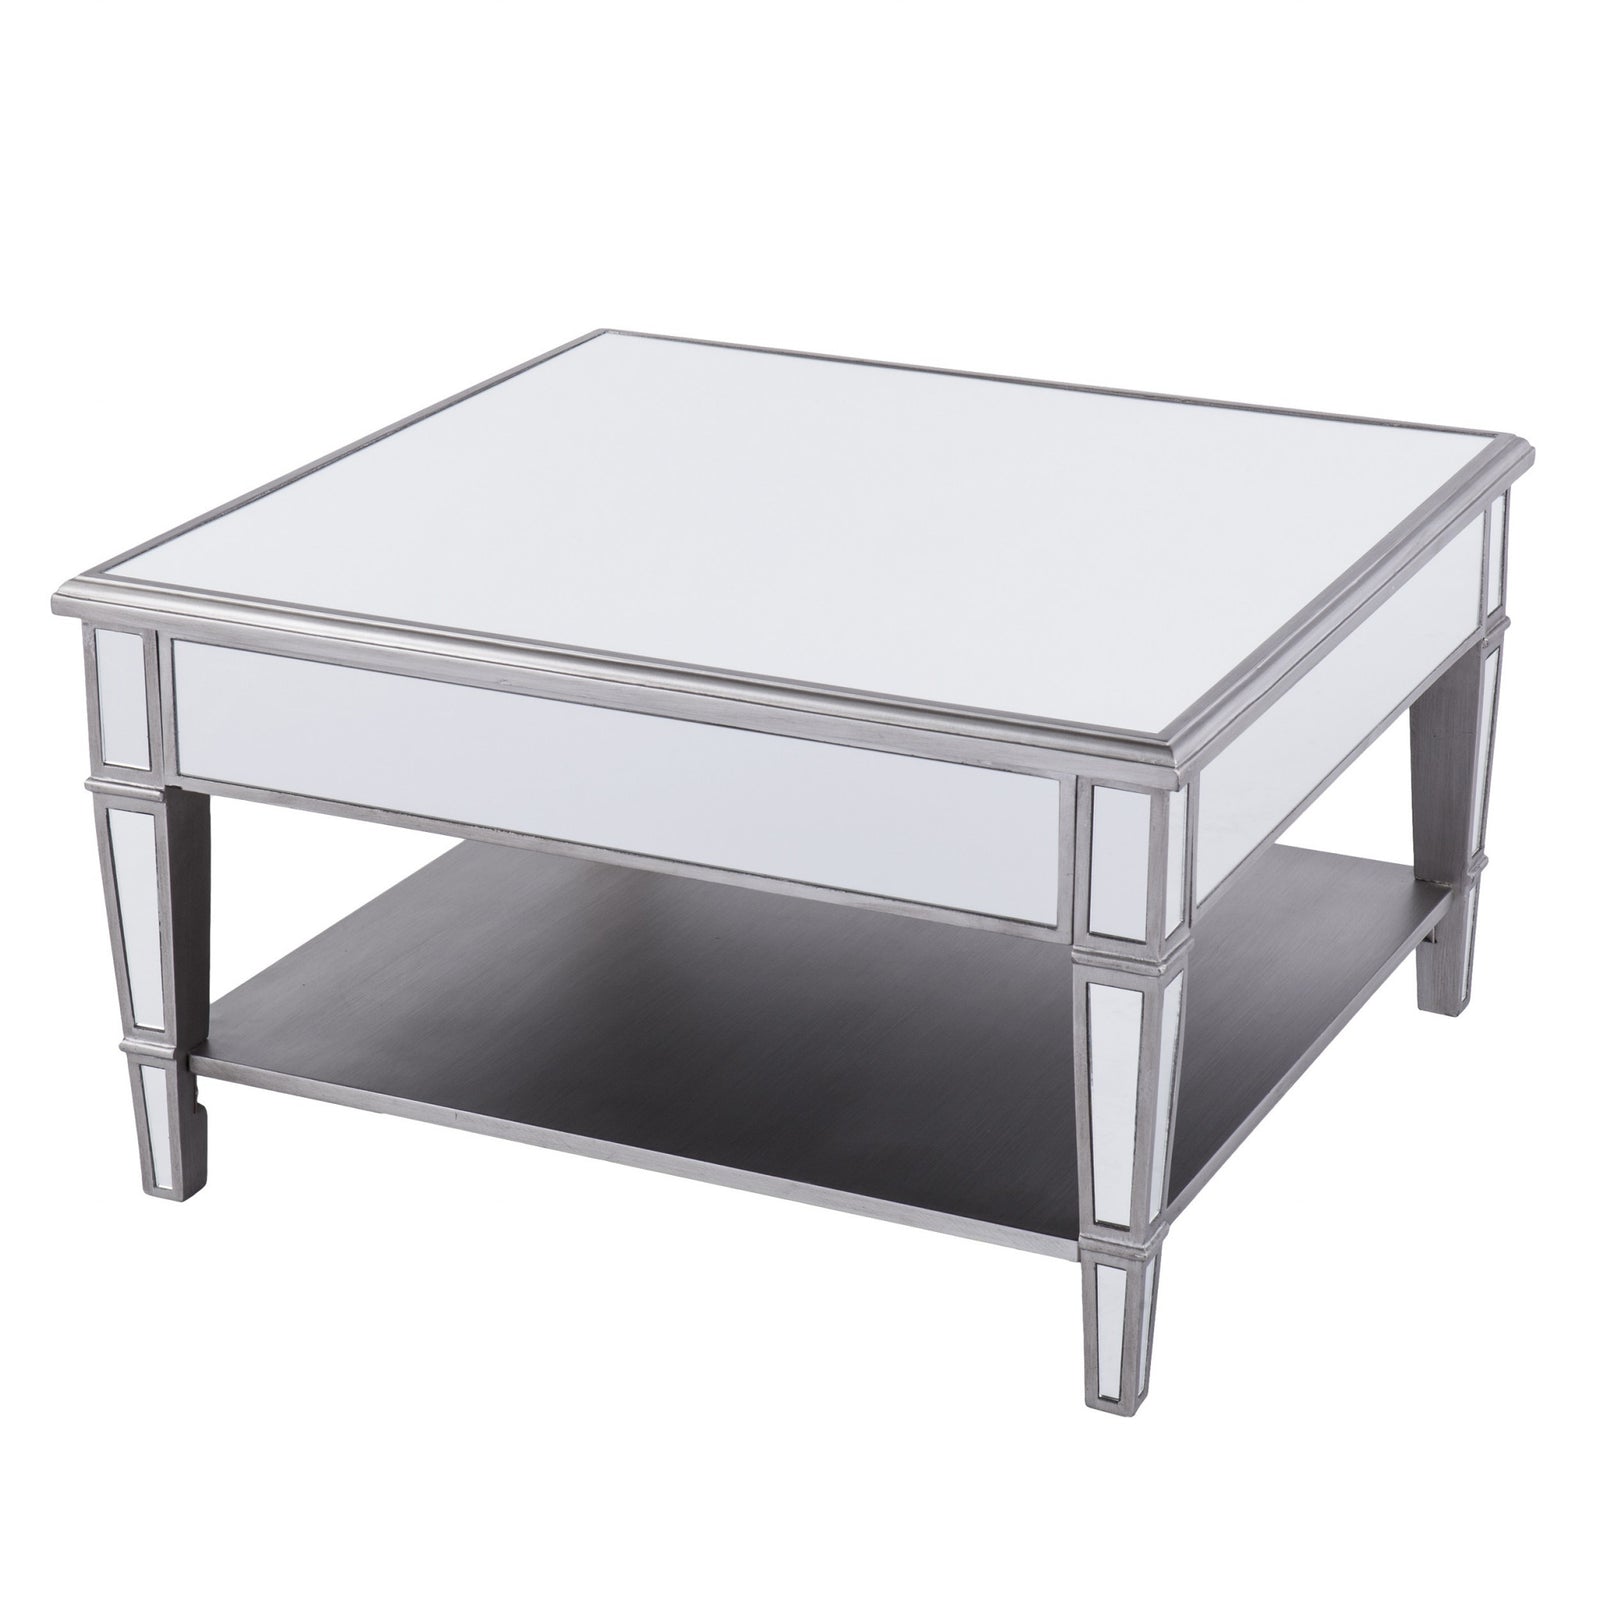 Silver Mirrored Glass Square Coffee Table 29"